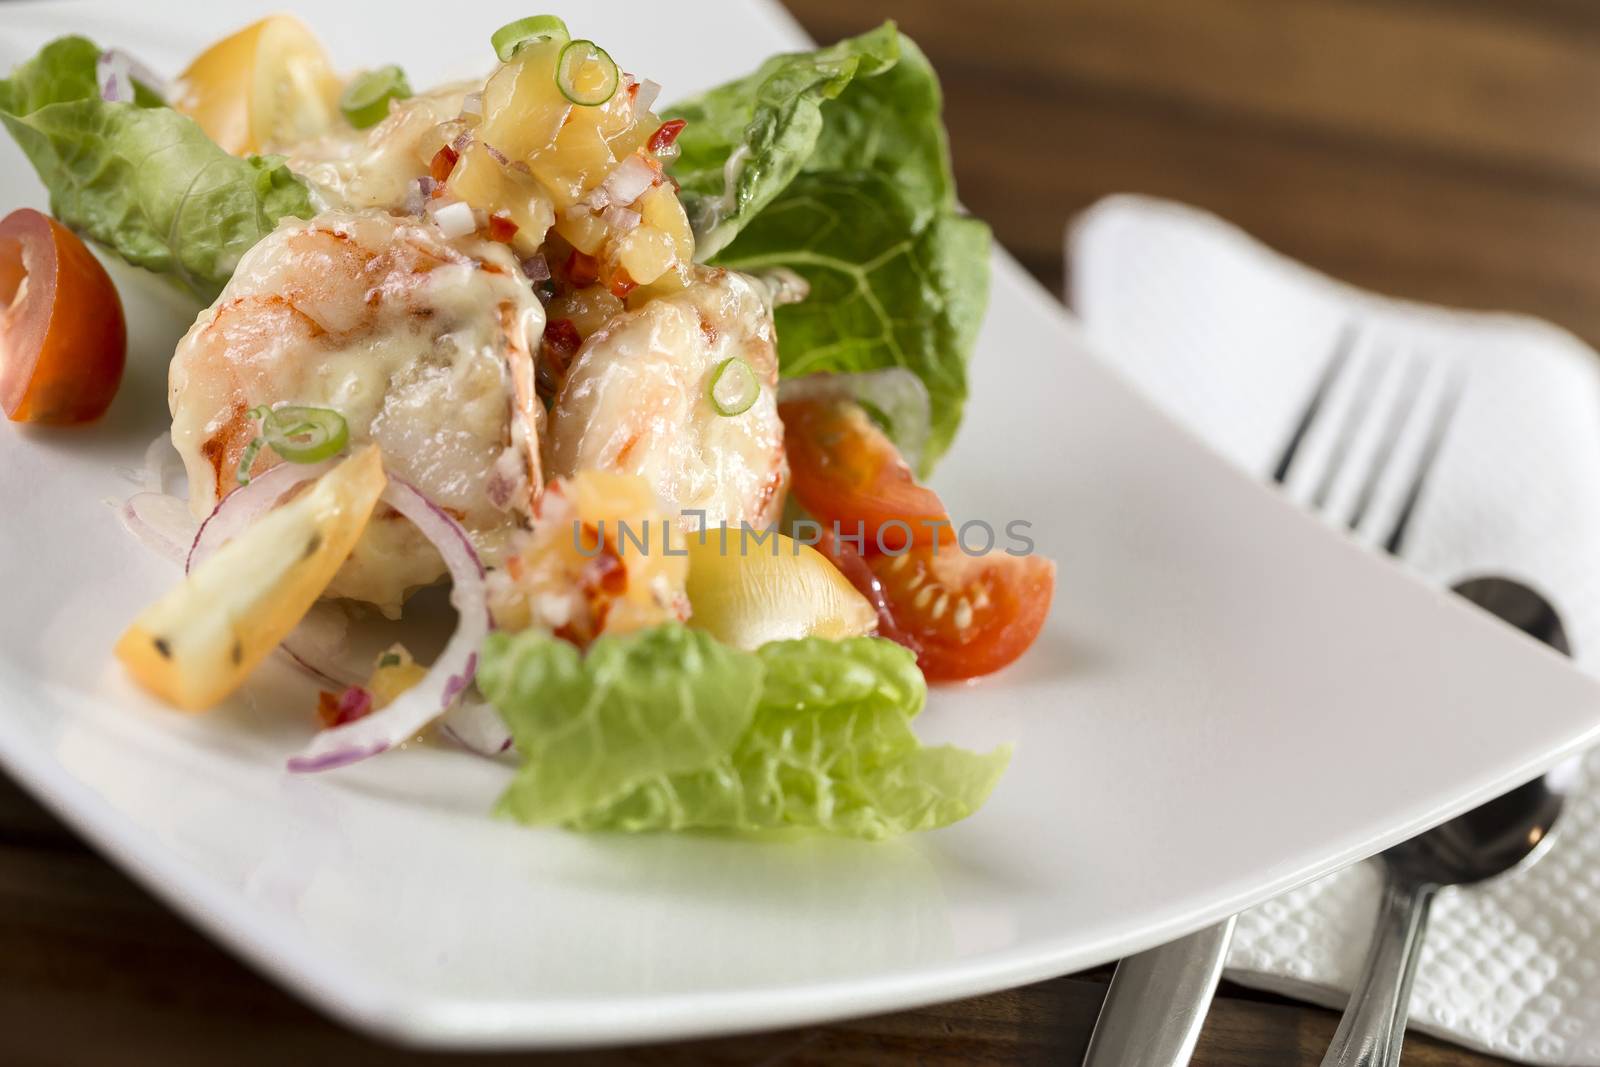 A plate of delicate creamy prawn ready to be served.